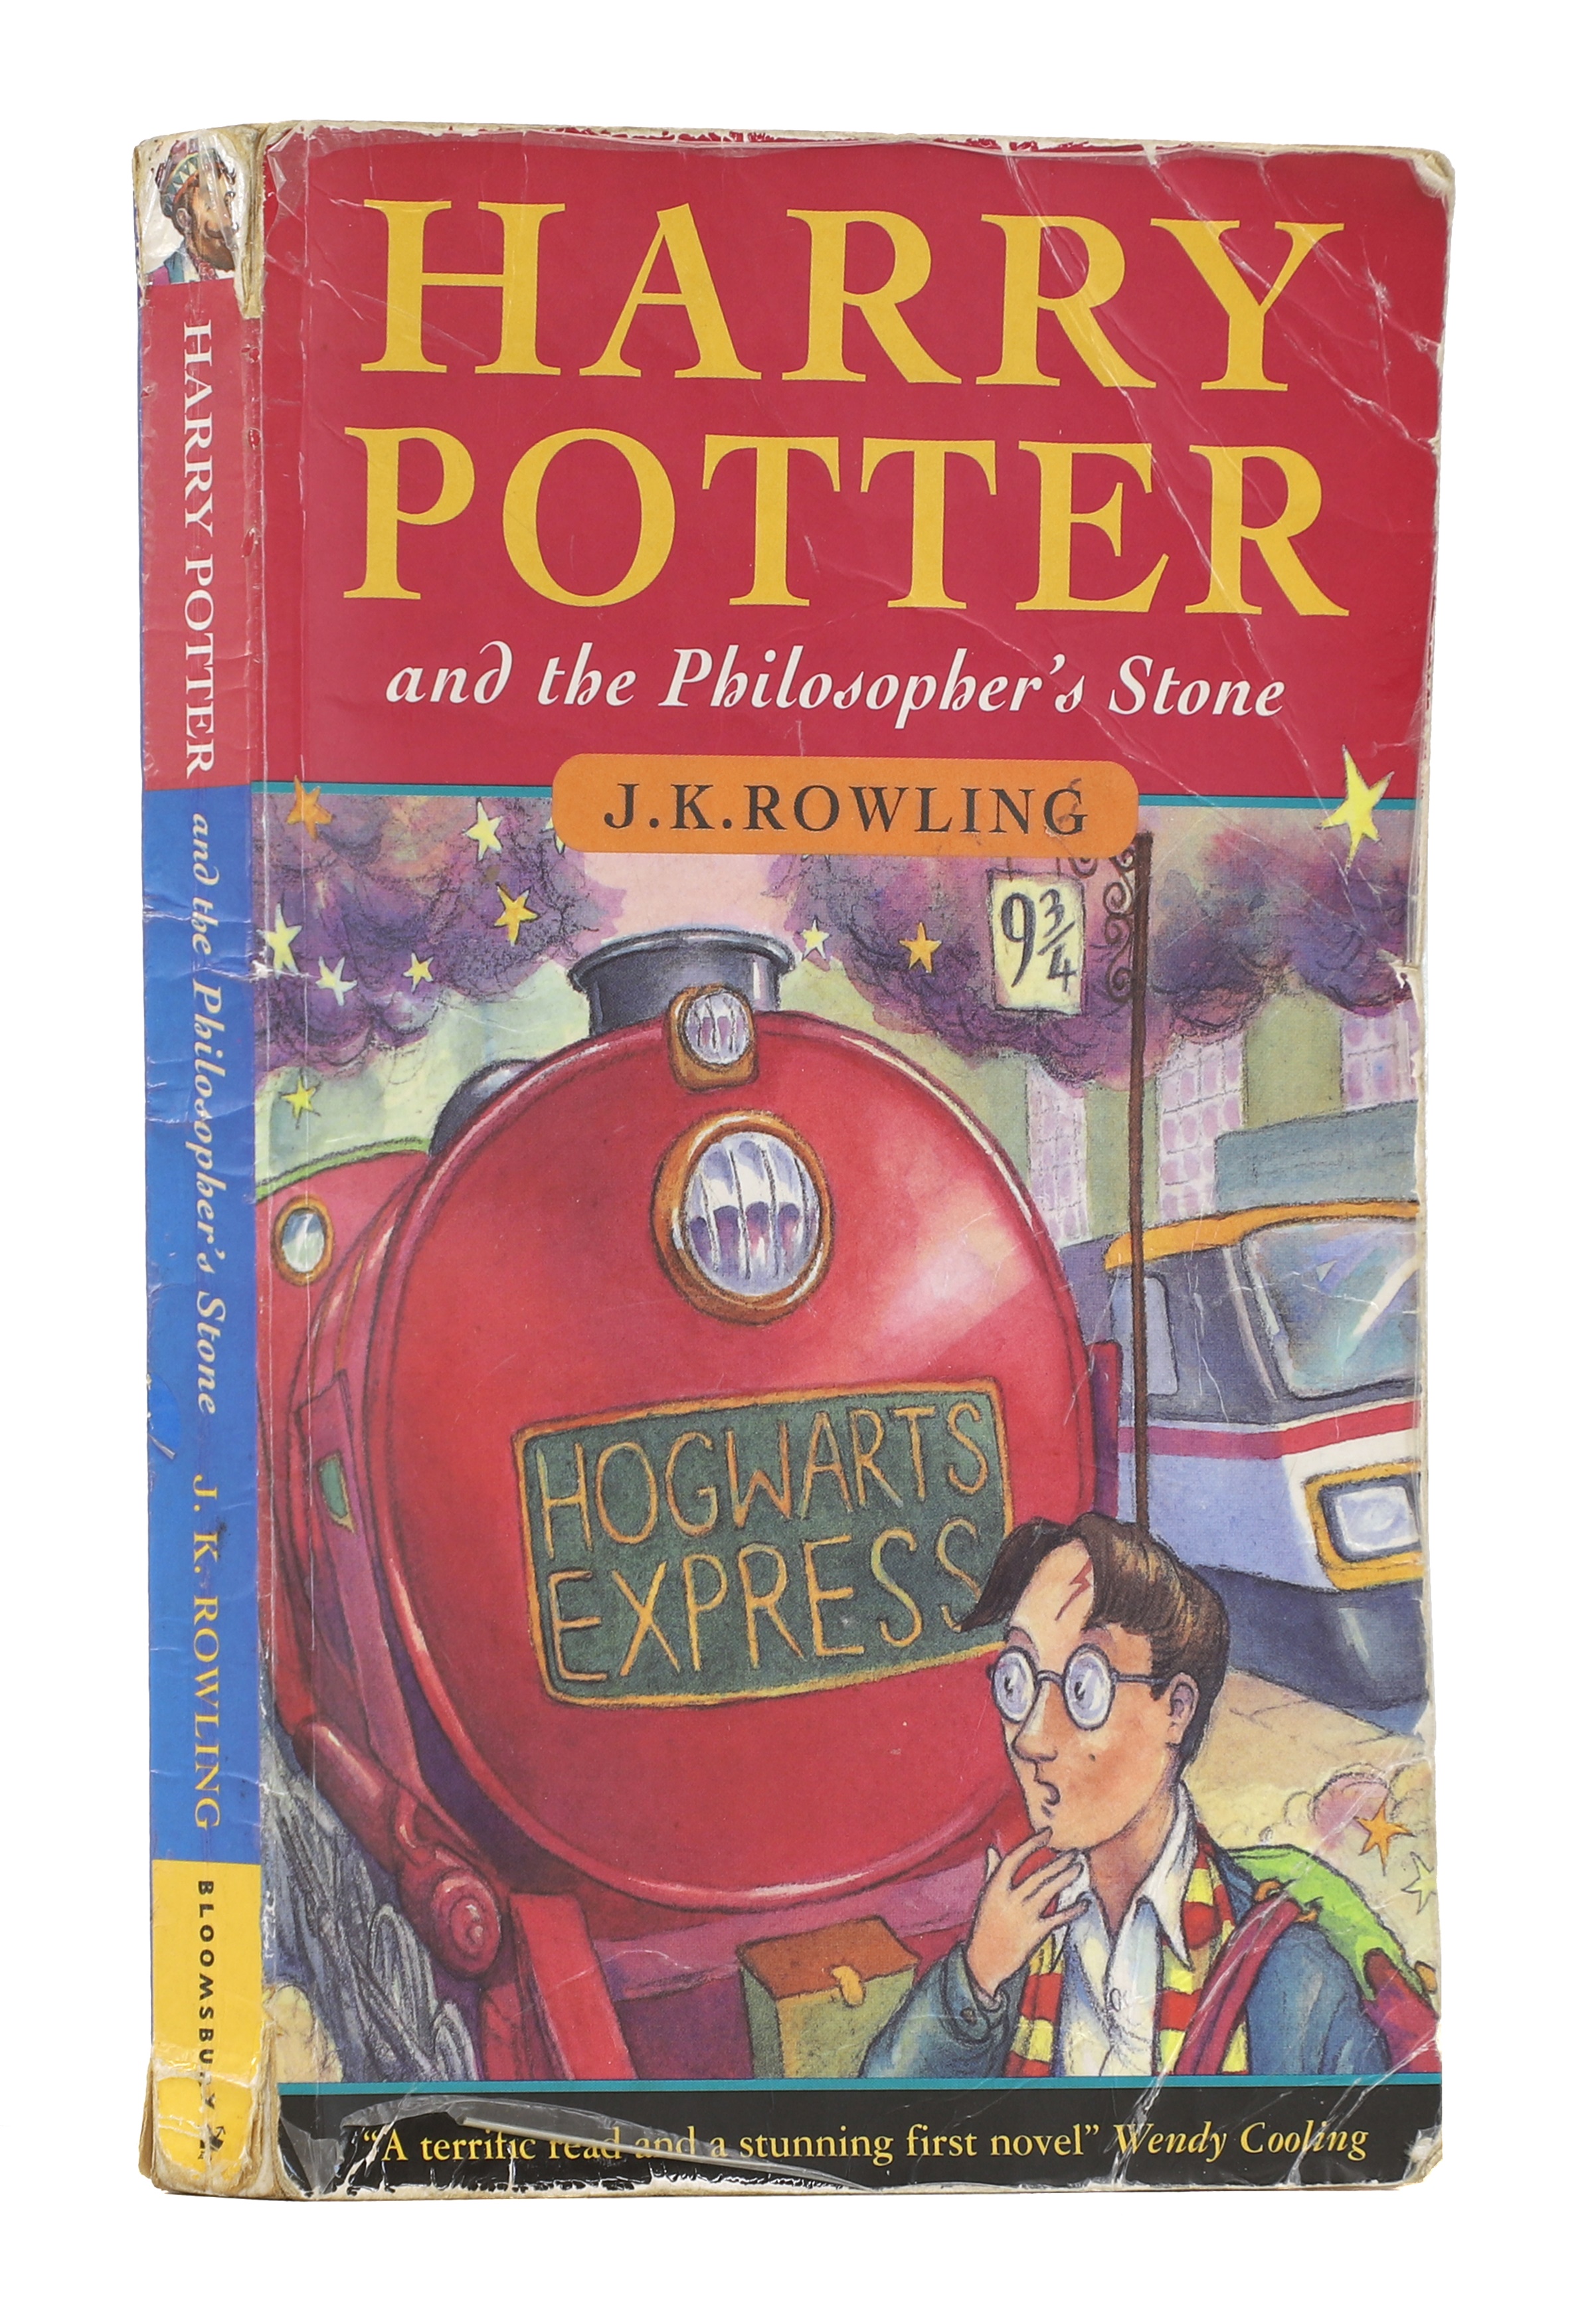 J K Rowling Harry Potter and the Philosopher's Stone First Edition, First Impression. (£2,000-3,000)